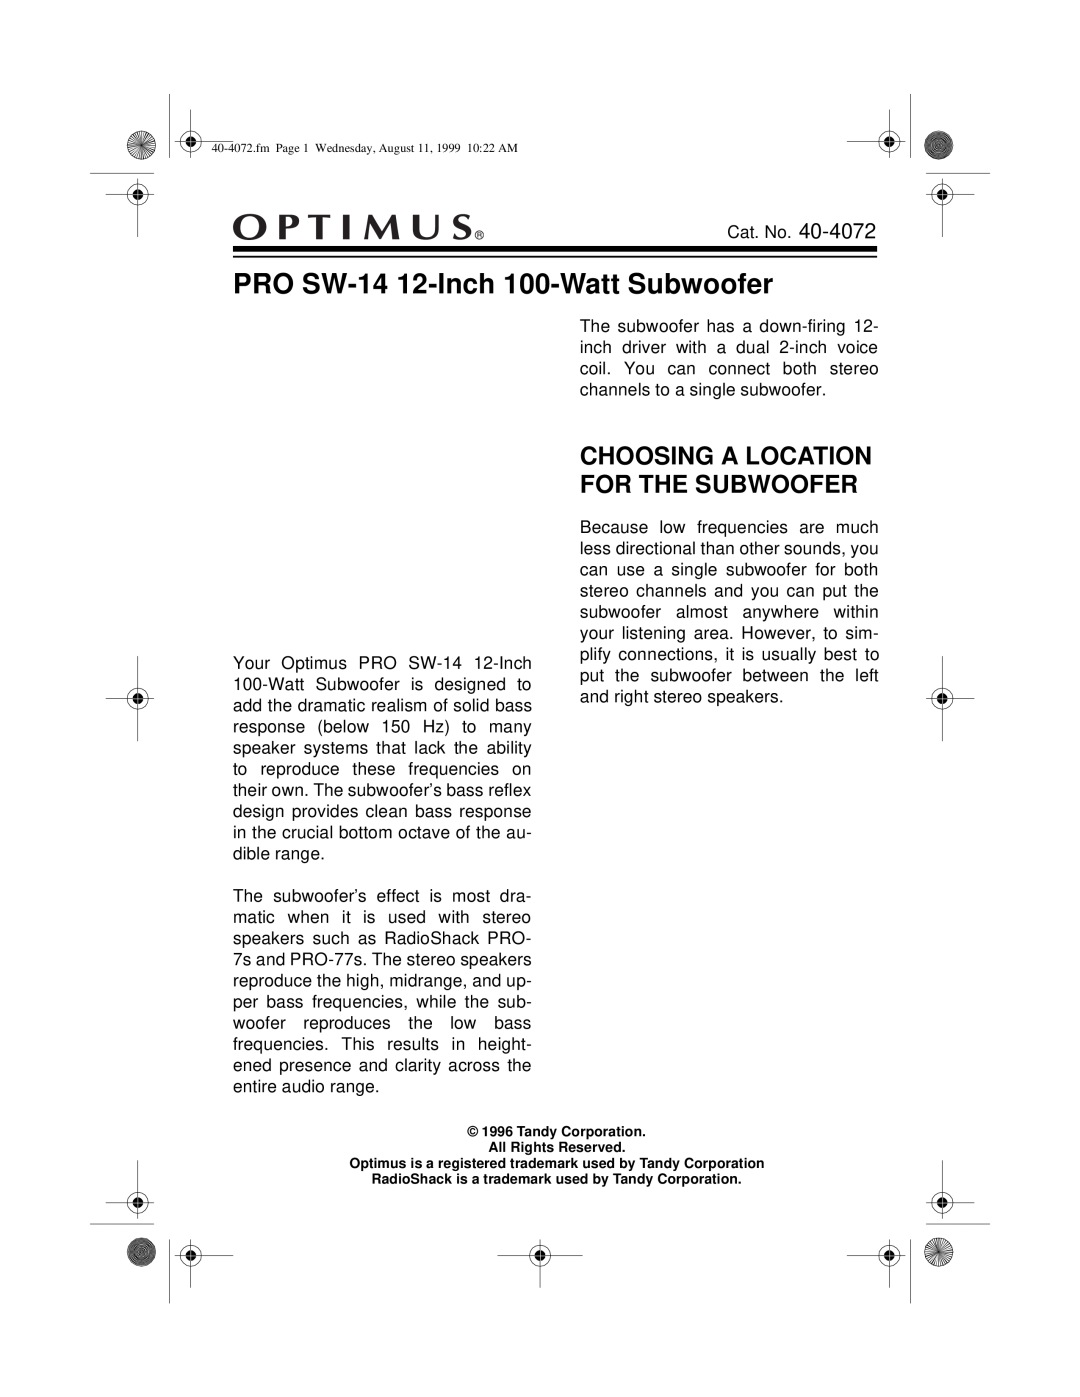 Optimus manual Choosing A Location For The Subwoofer, PRO SW-14 12-Inch 100-WattSubwoofer 